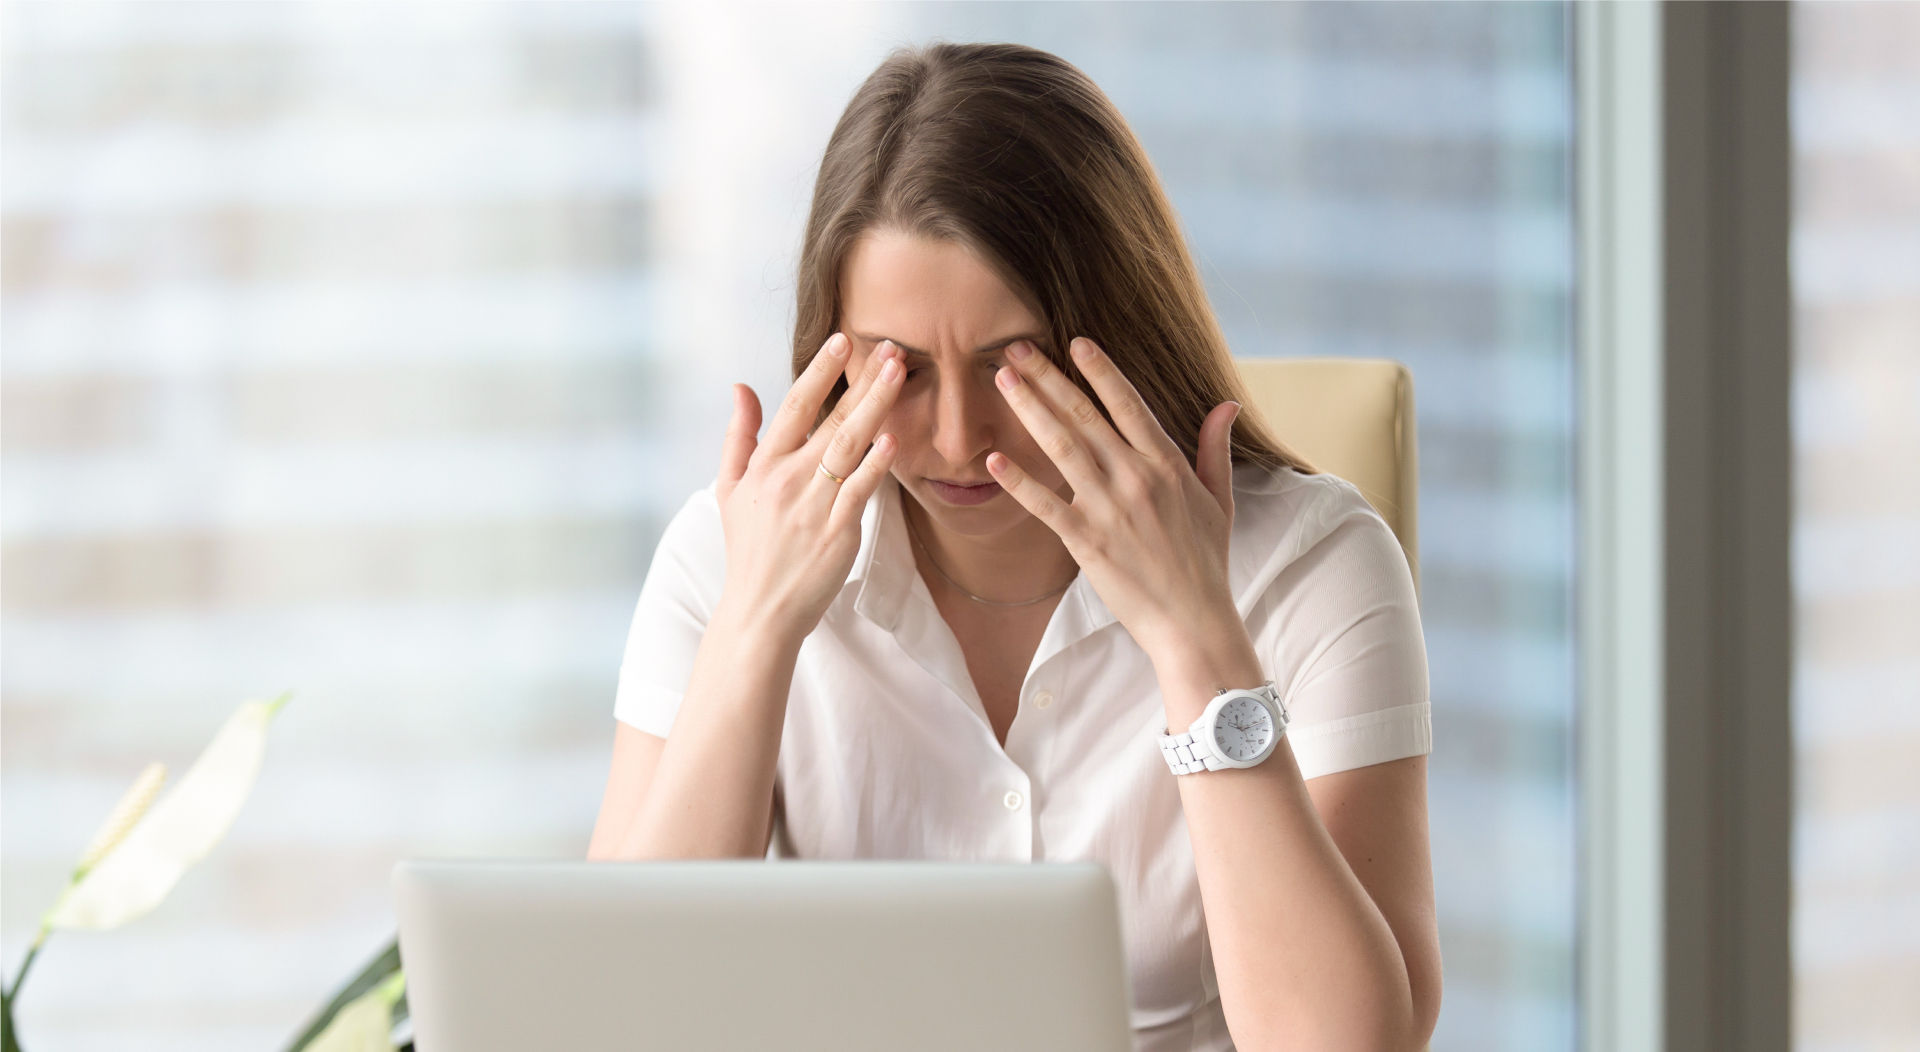 Computer Vision Syndrome (CVS) symptoms including headaches, watery eyes, redness, and blurry vision are often associated with eye strain